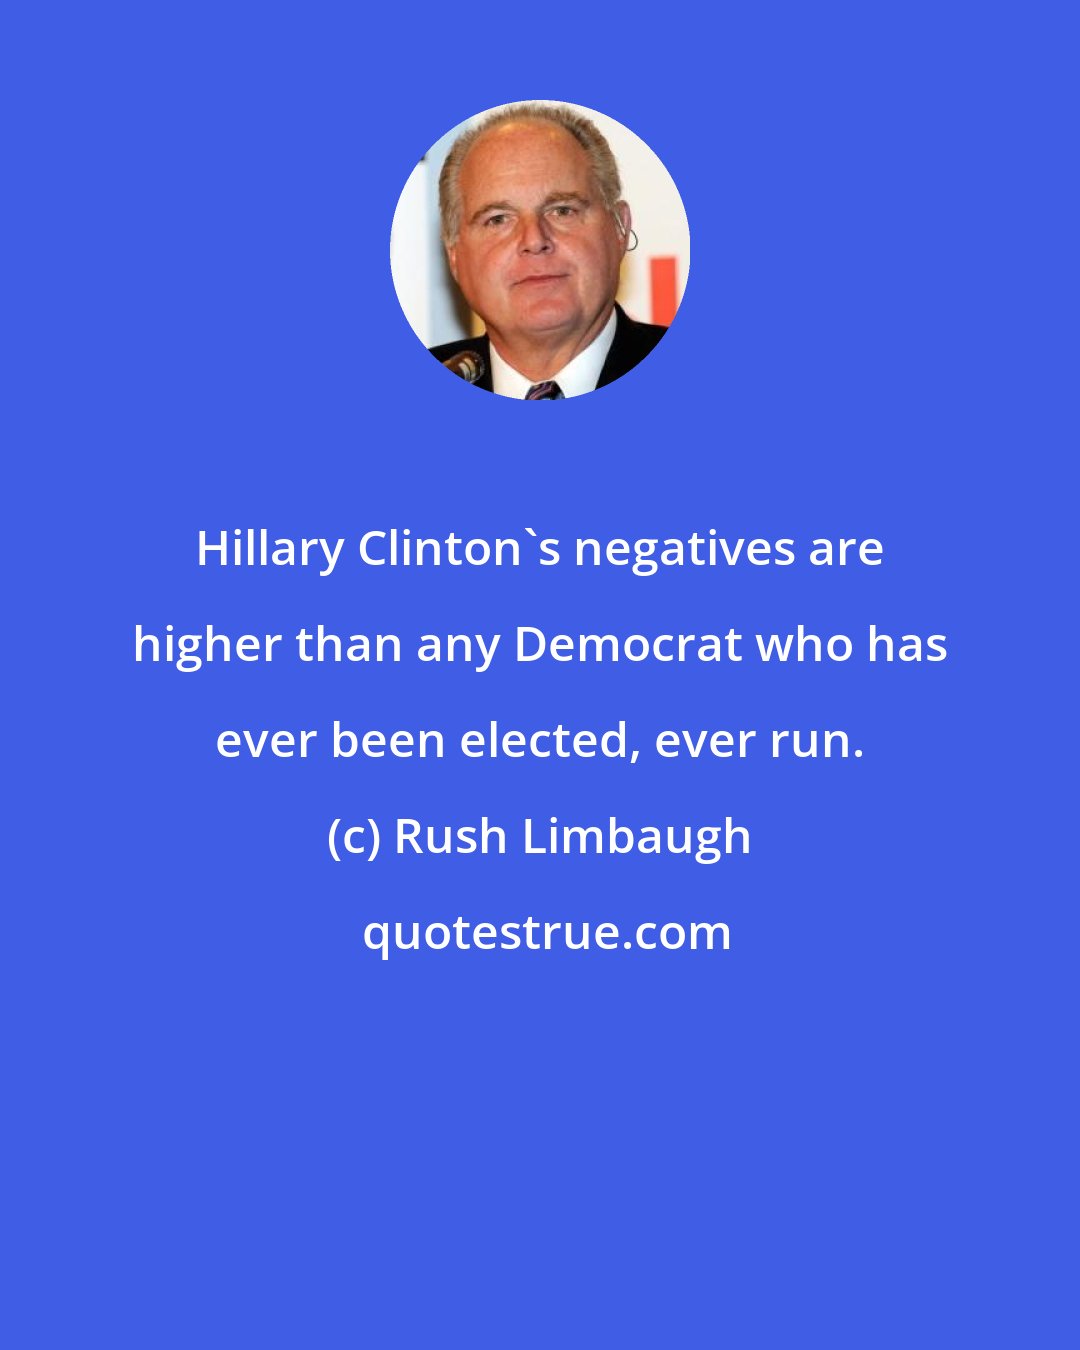 Rush Limbaugh: Hillary Clinton's negatives are higher than any Democrat who has ever been elected, ever run.